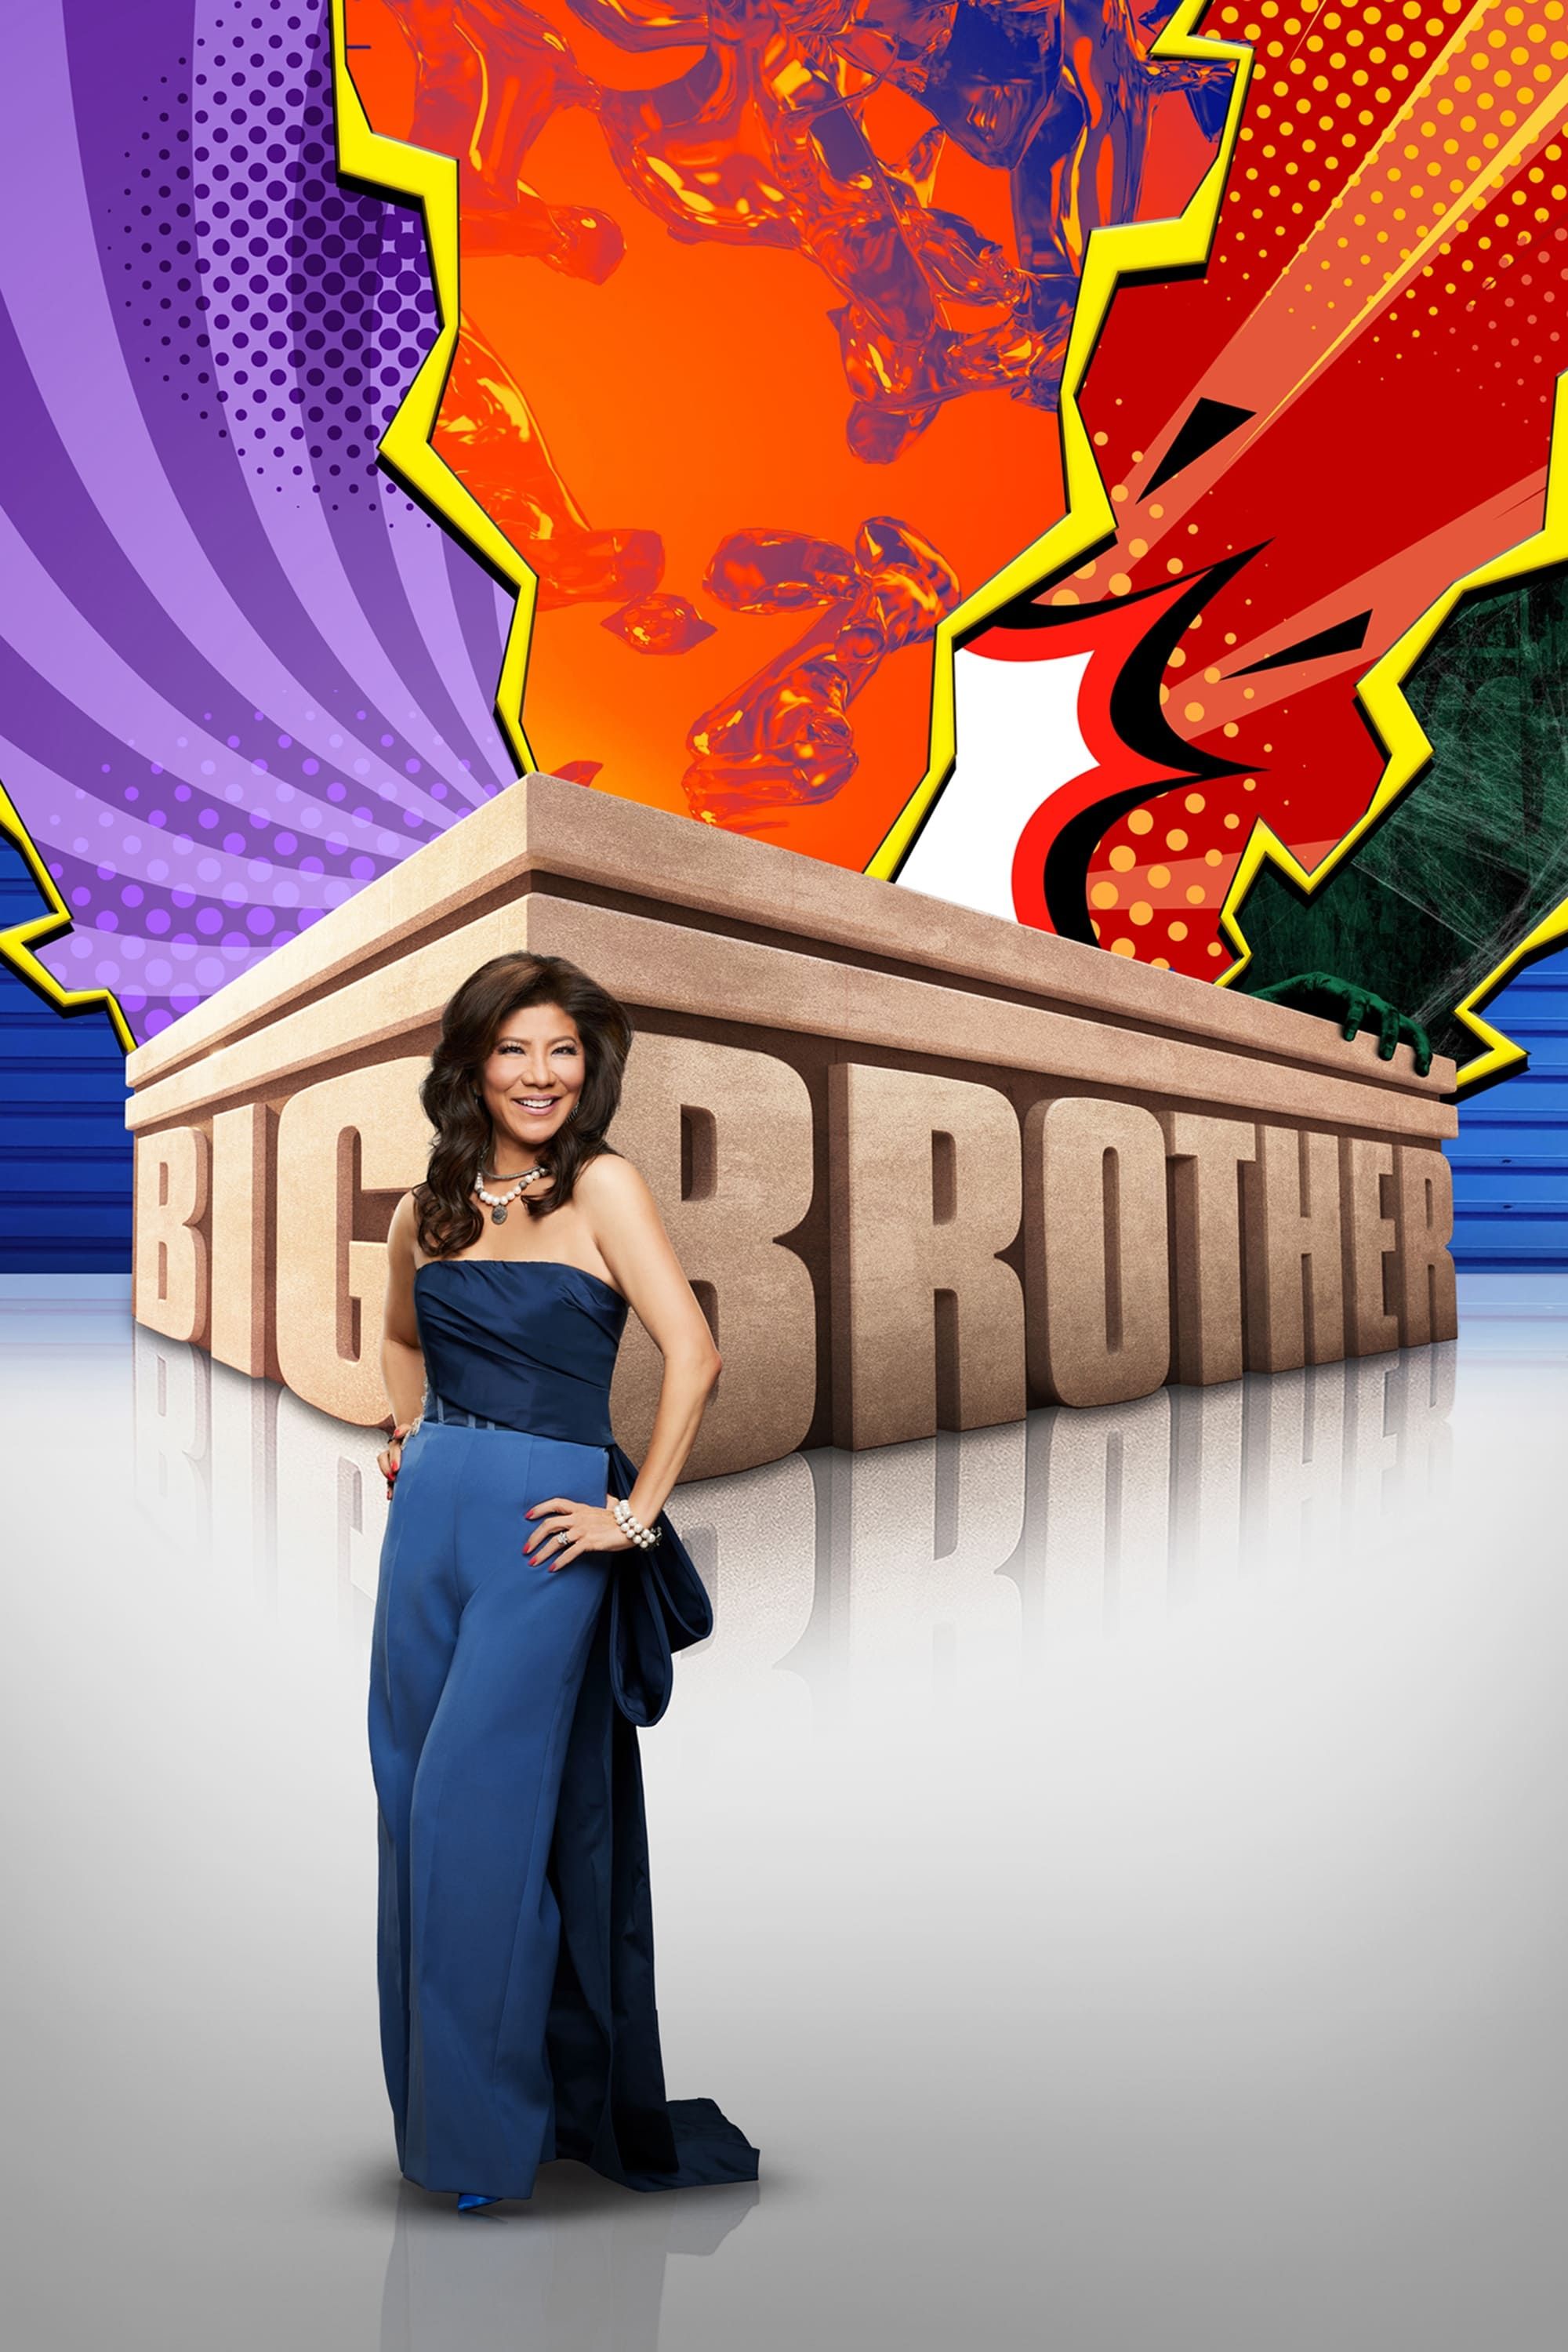 Big Brother 2000 TV Show Poster